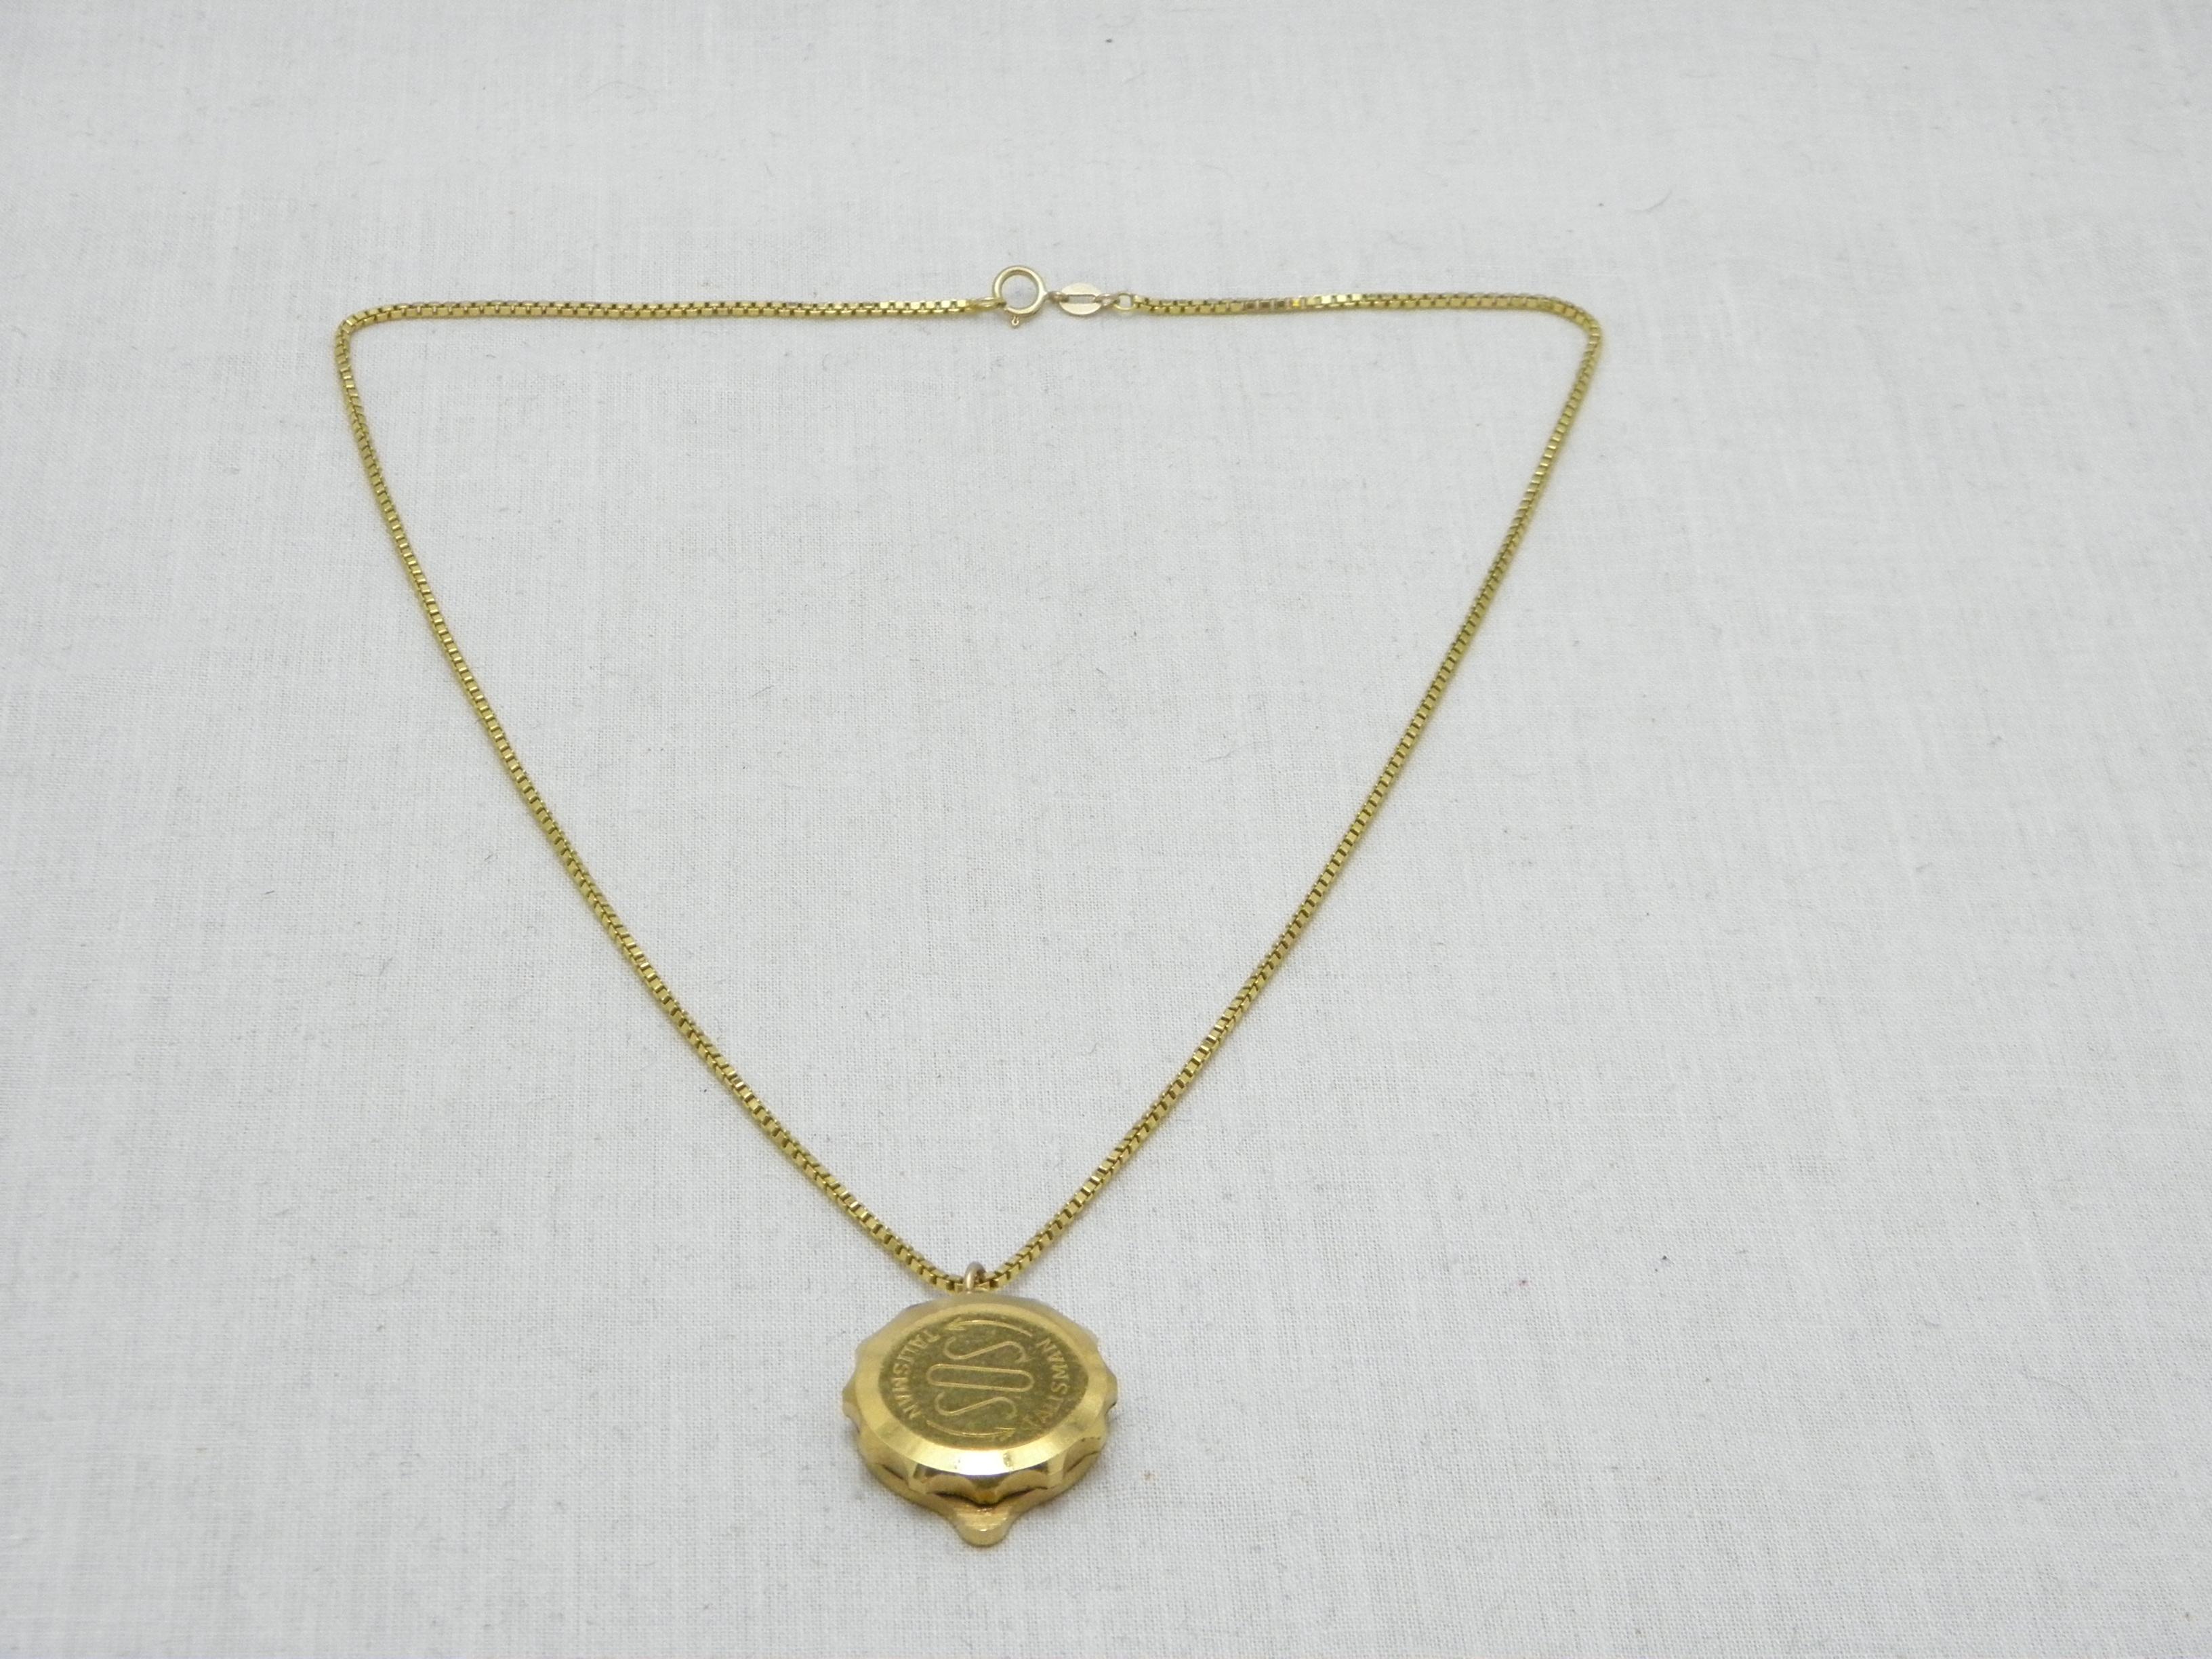 Vintage 9ct Gold Heavy Cancer Crab SOS Pendant Necklace Box Chain 375 19 Inch For Sale 1